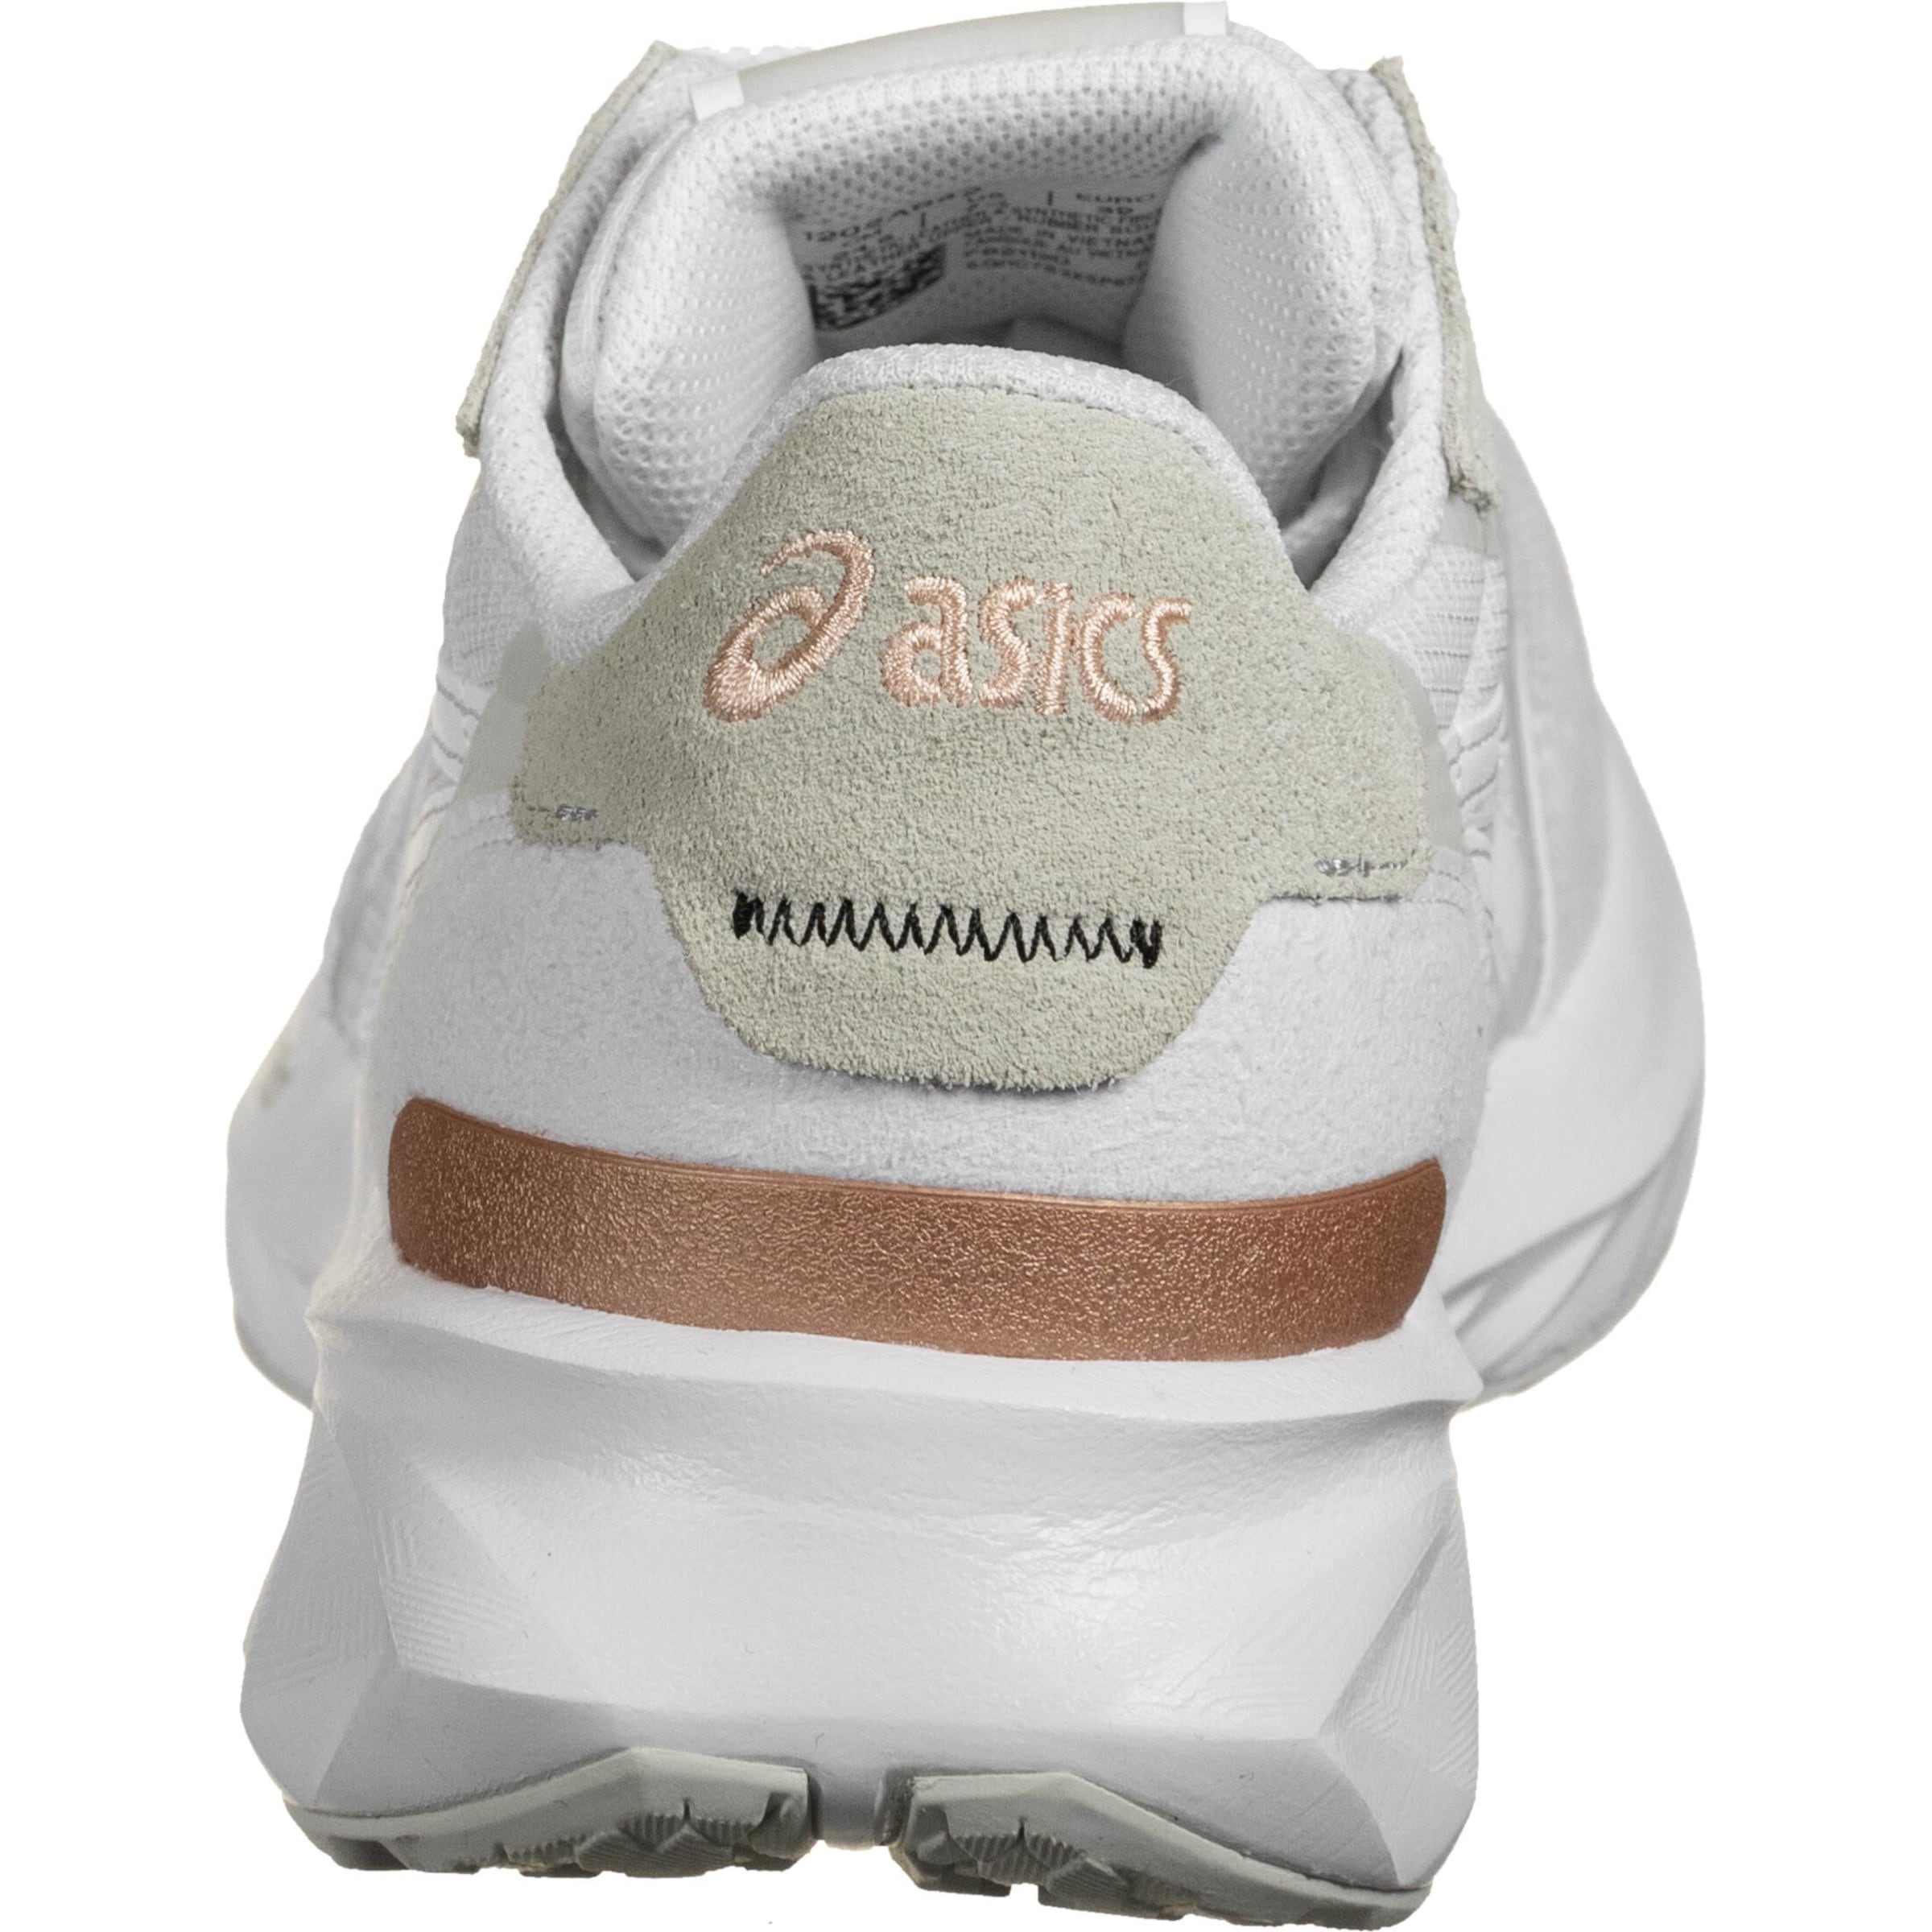 Chaussures Baskets basses Tarther Blast ASICS SportStyle en Gris, Taupe 